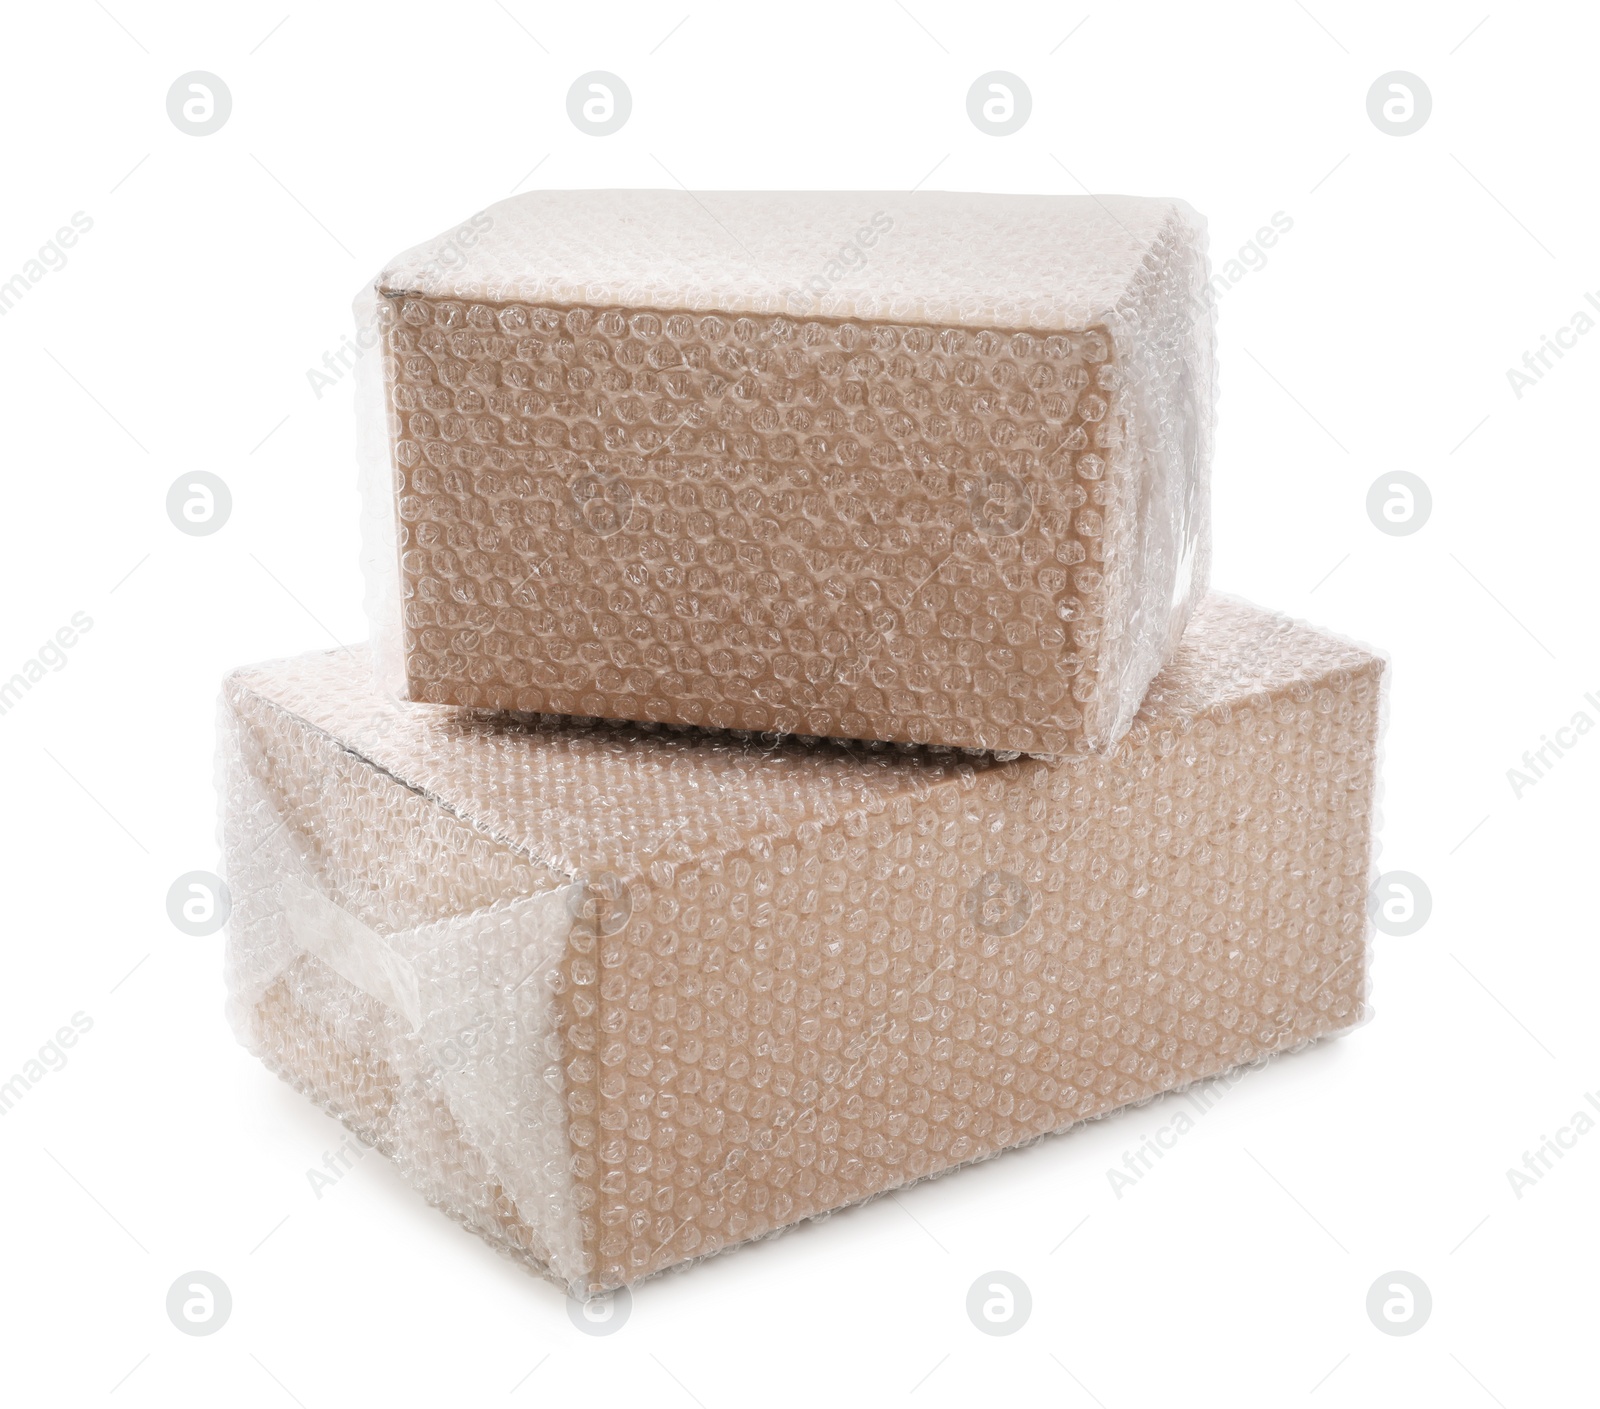 Photo of Cardboard boxes packed in bubble wrap on white background